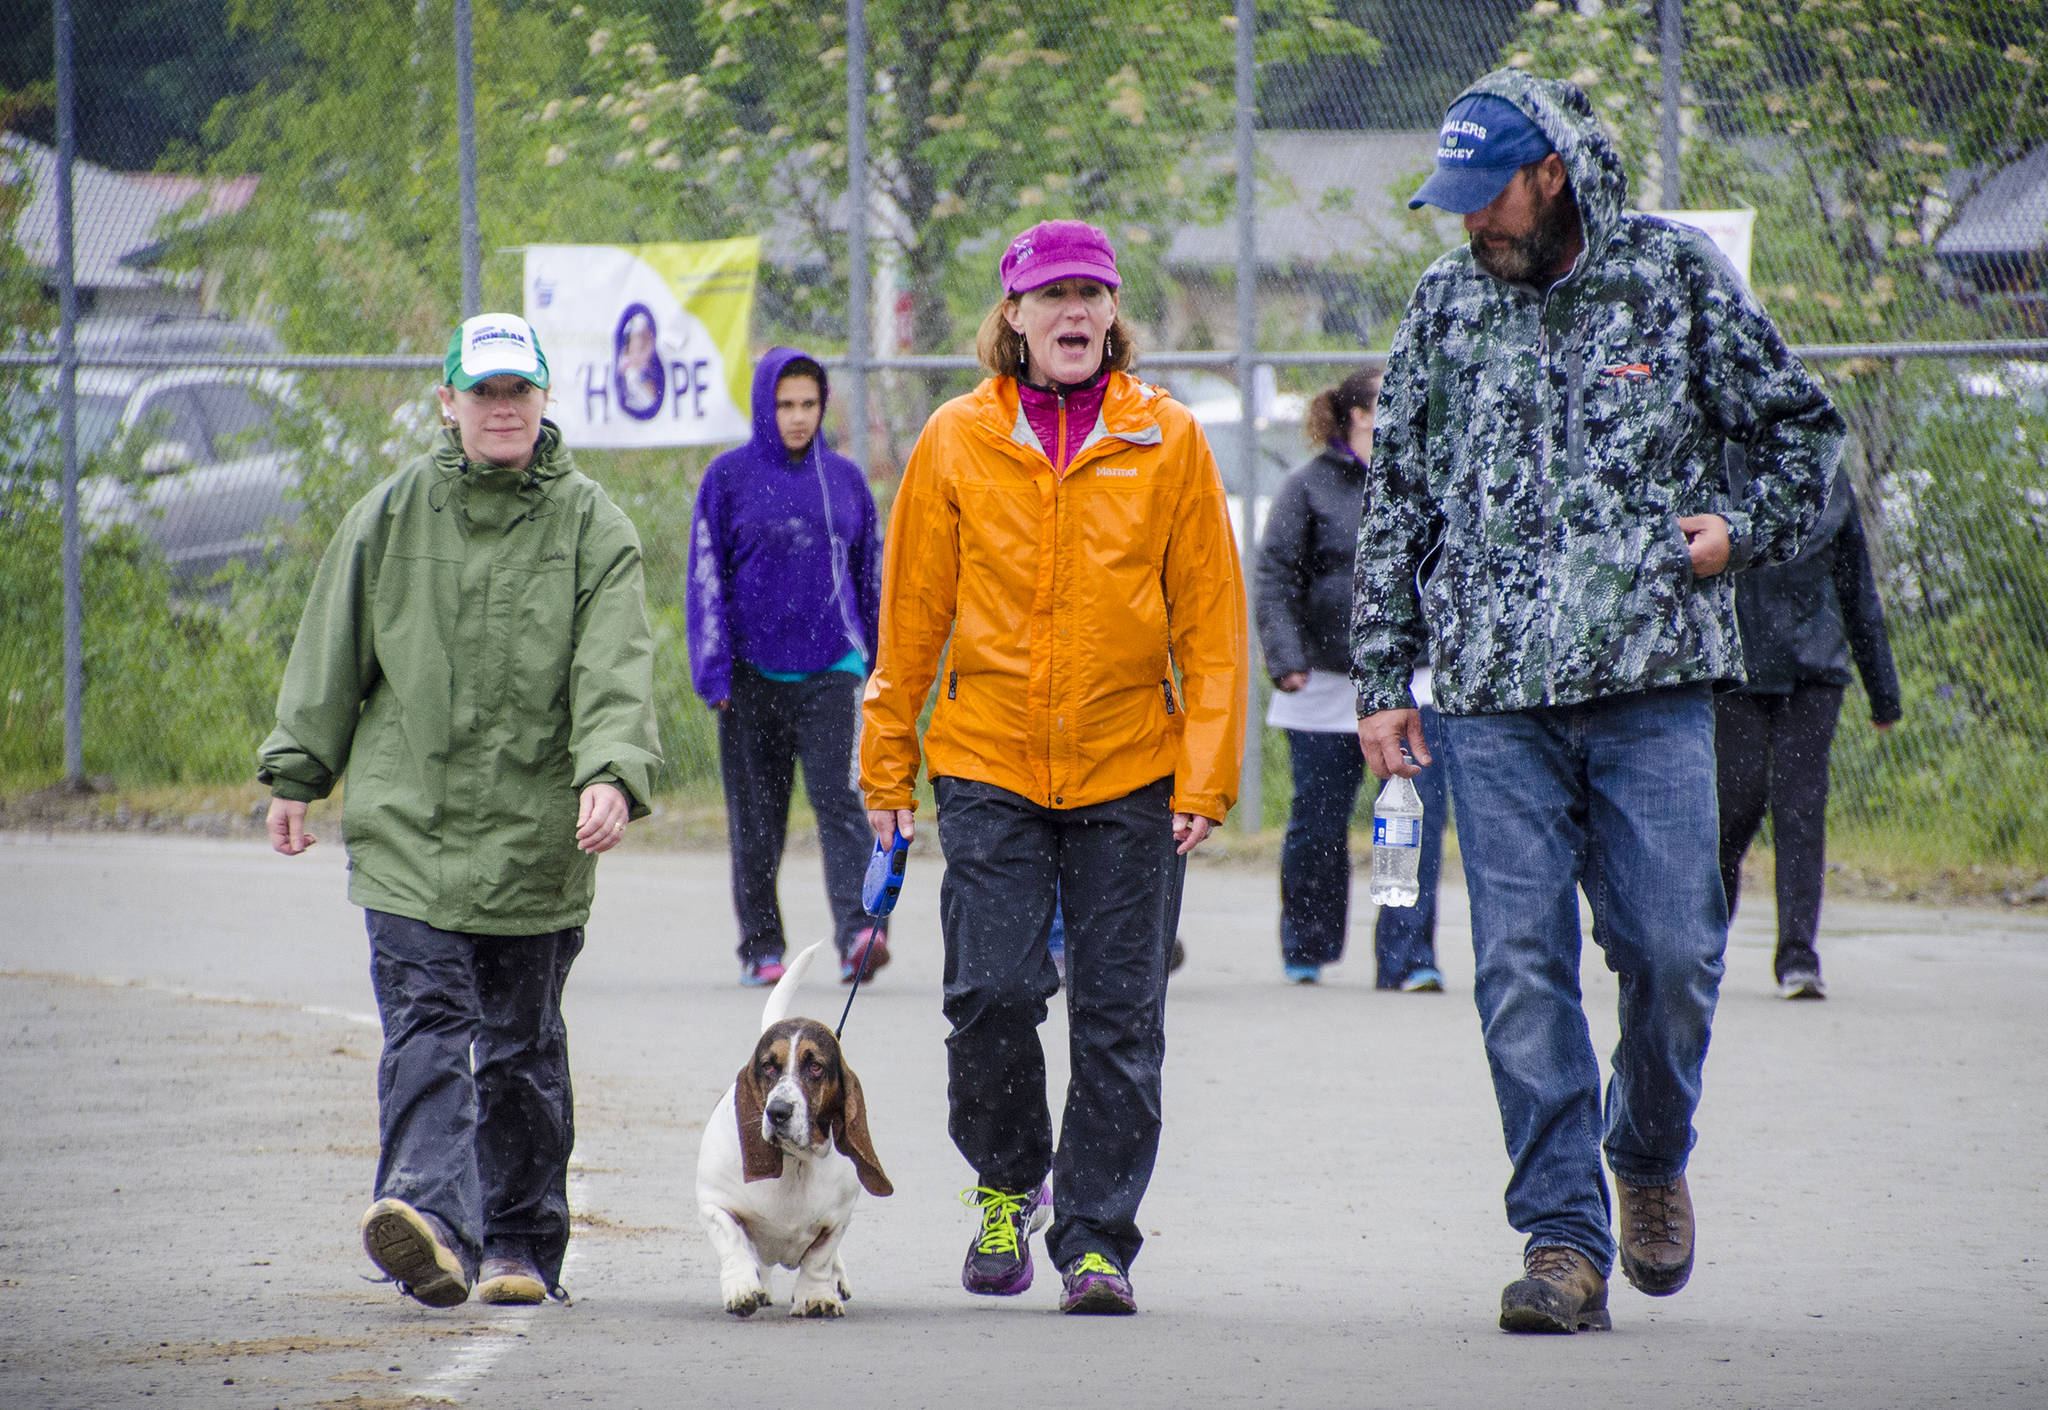 In this 2014 file photo, Kim Campbell, dog Frazier, Melanie White, and Bill Campbell walk laps during the Relay for Life at Riverbend Elementary School. (Marlena Sloss | Juneau Empire)